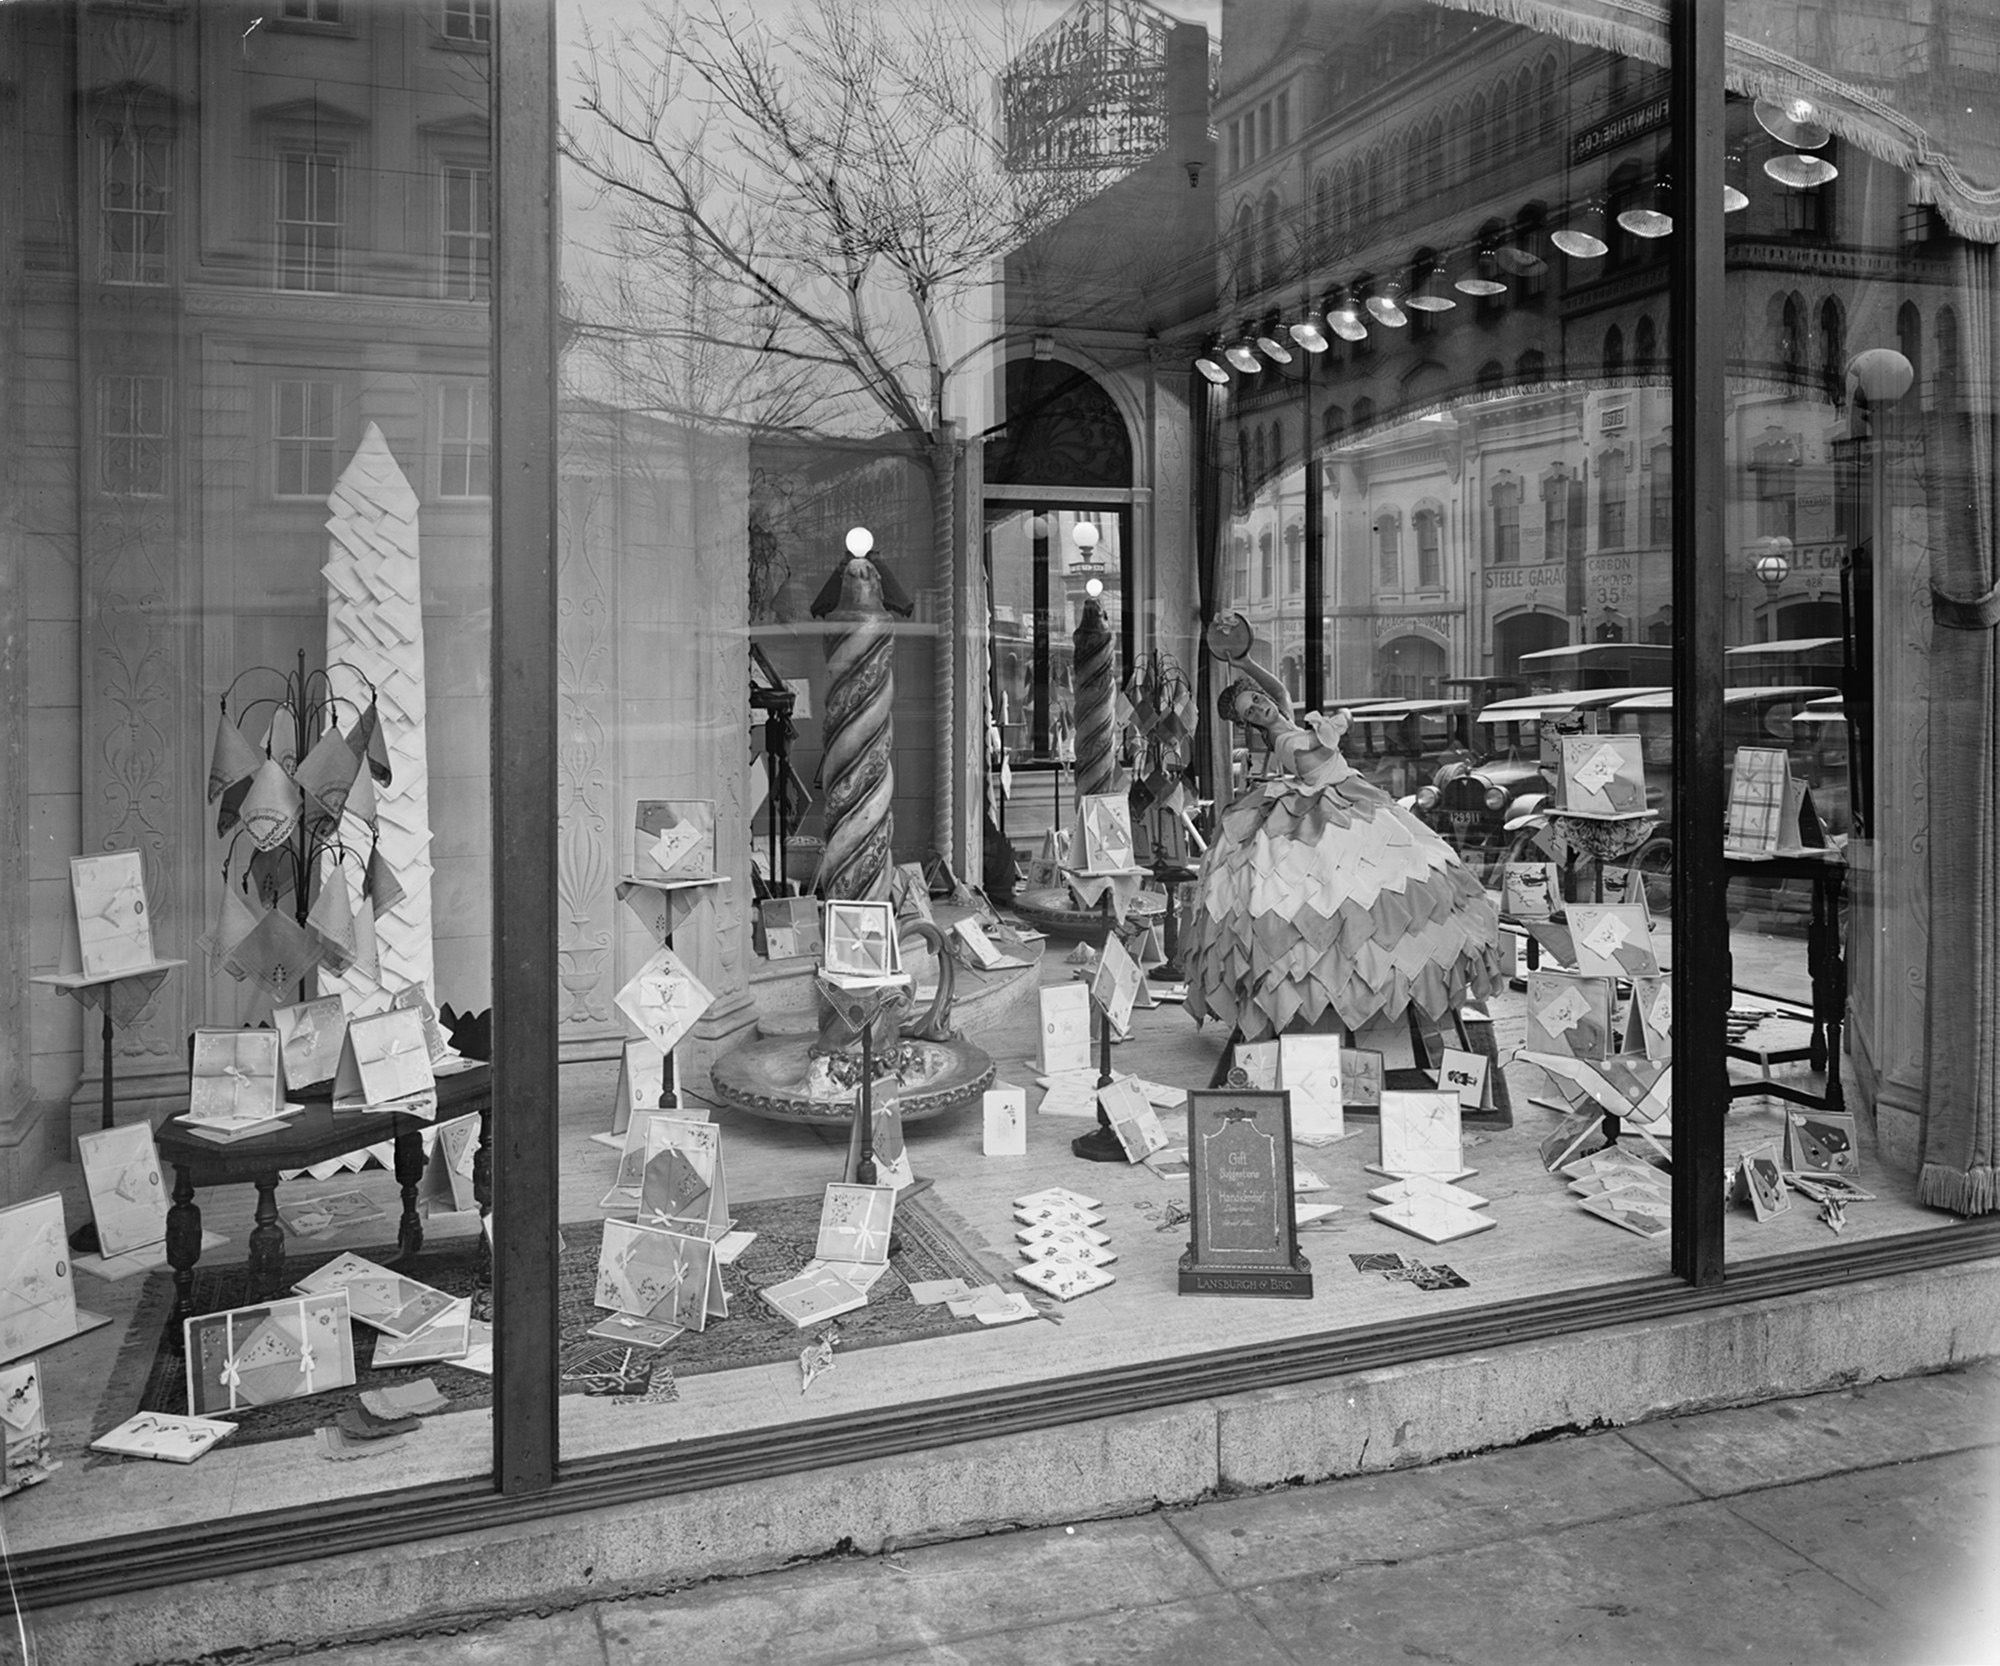 Window display of handkerchiefs at Lansburgh & Brothers Department Store. The building, now a CVS Pharmacy still stands at the intersection of E St NW & 8th St NW, Washington D.C. Most of the buildings reflected in the glass and across the street have also survived the passage of time. View full size.